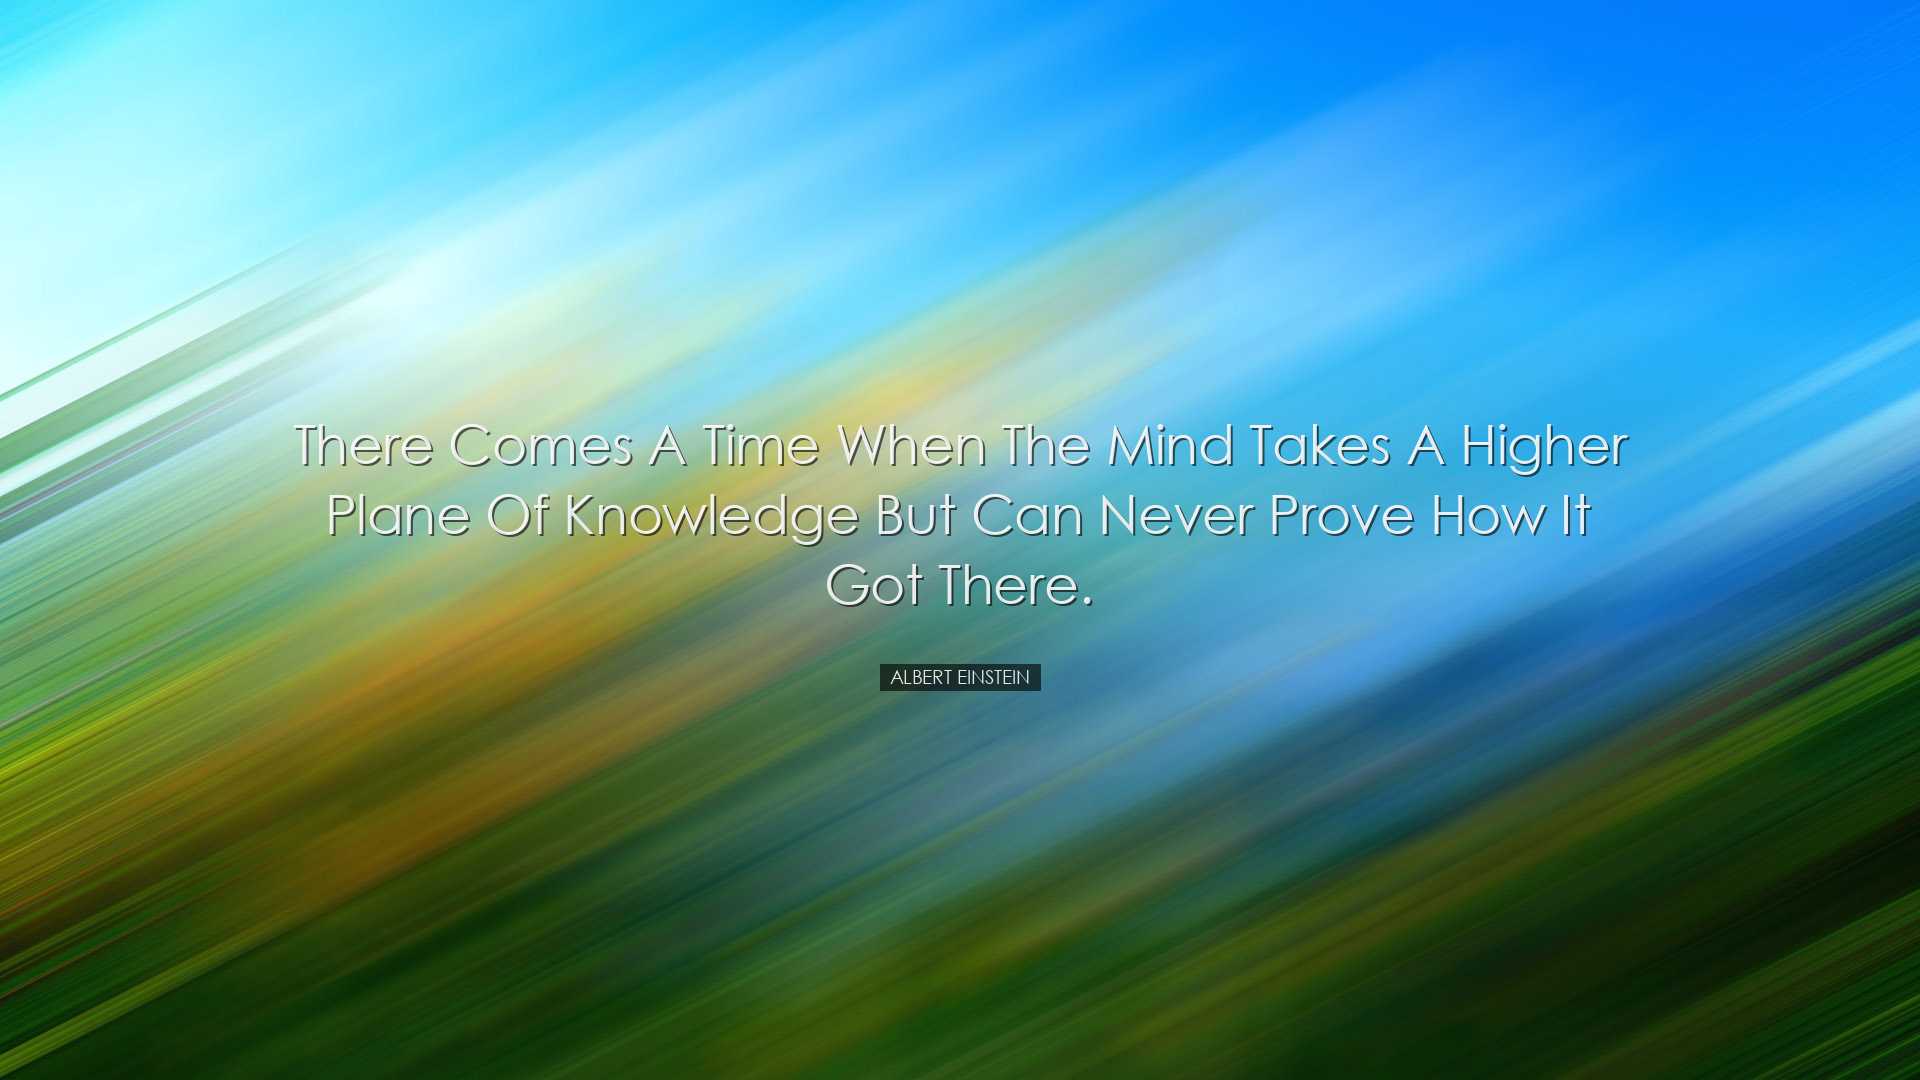 There comes a time when the mind takes a higher plane of knowledge